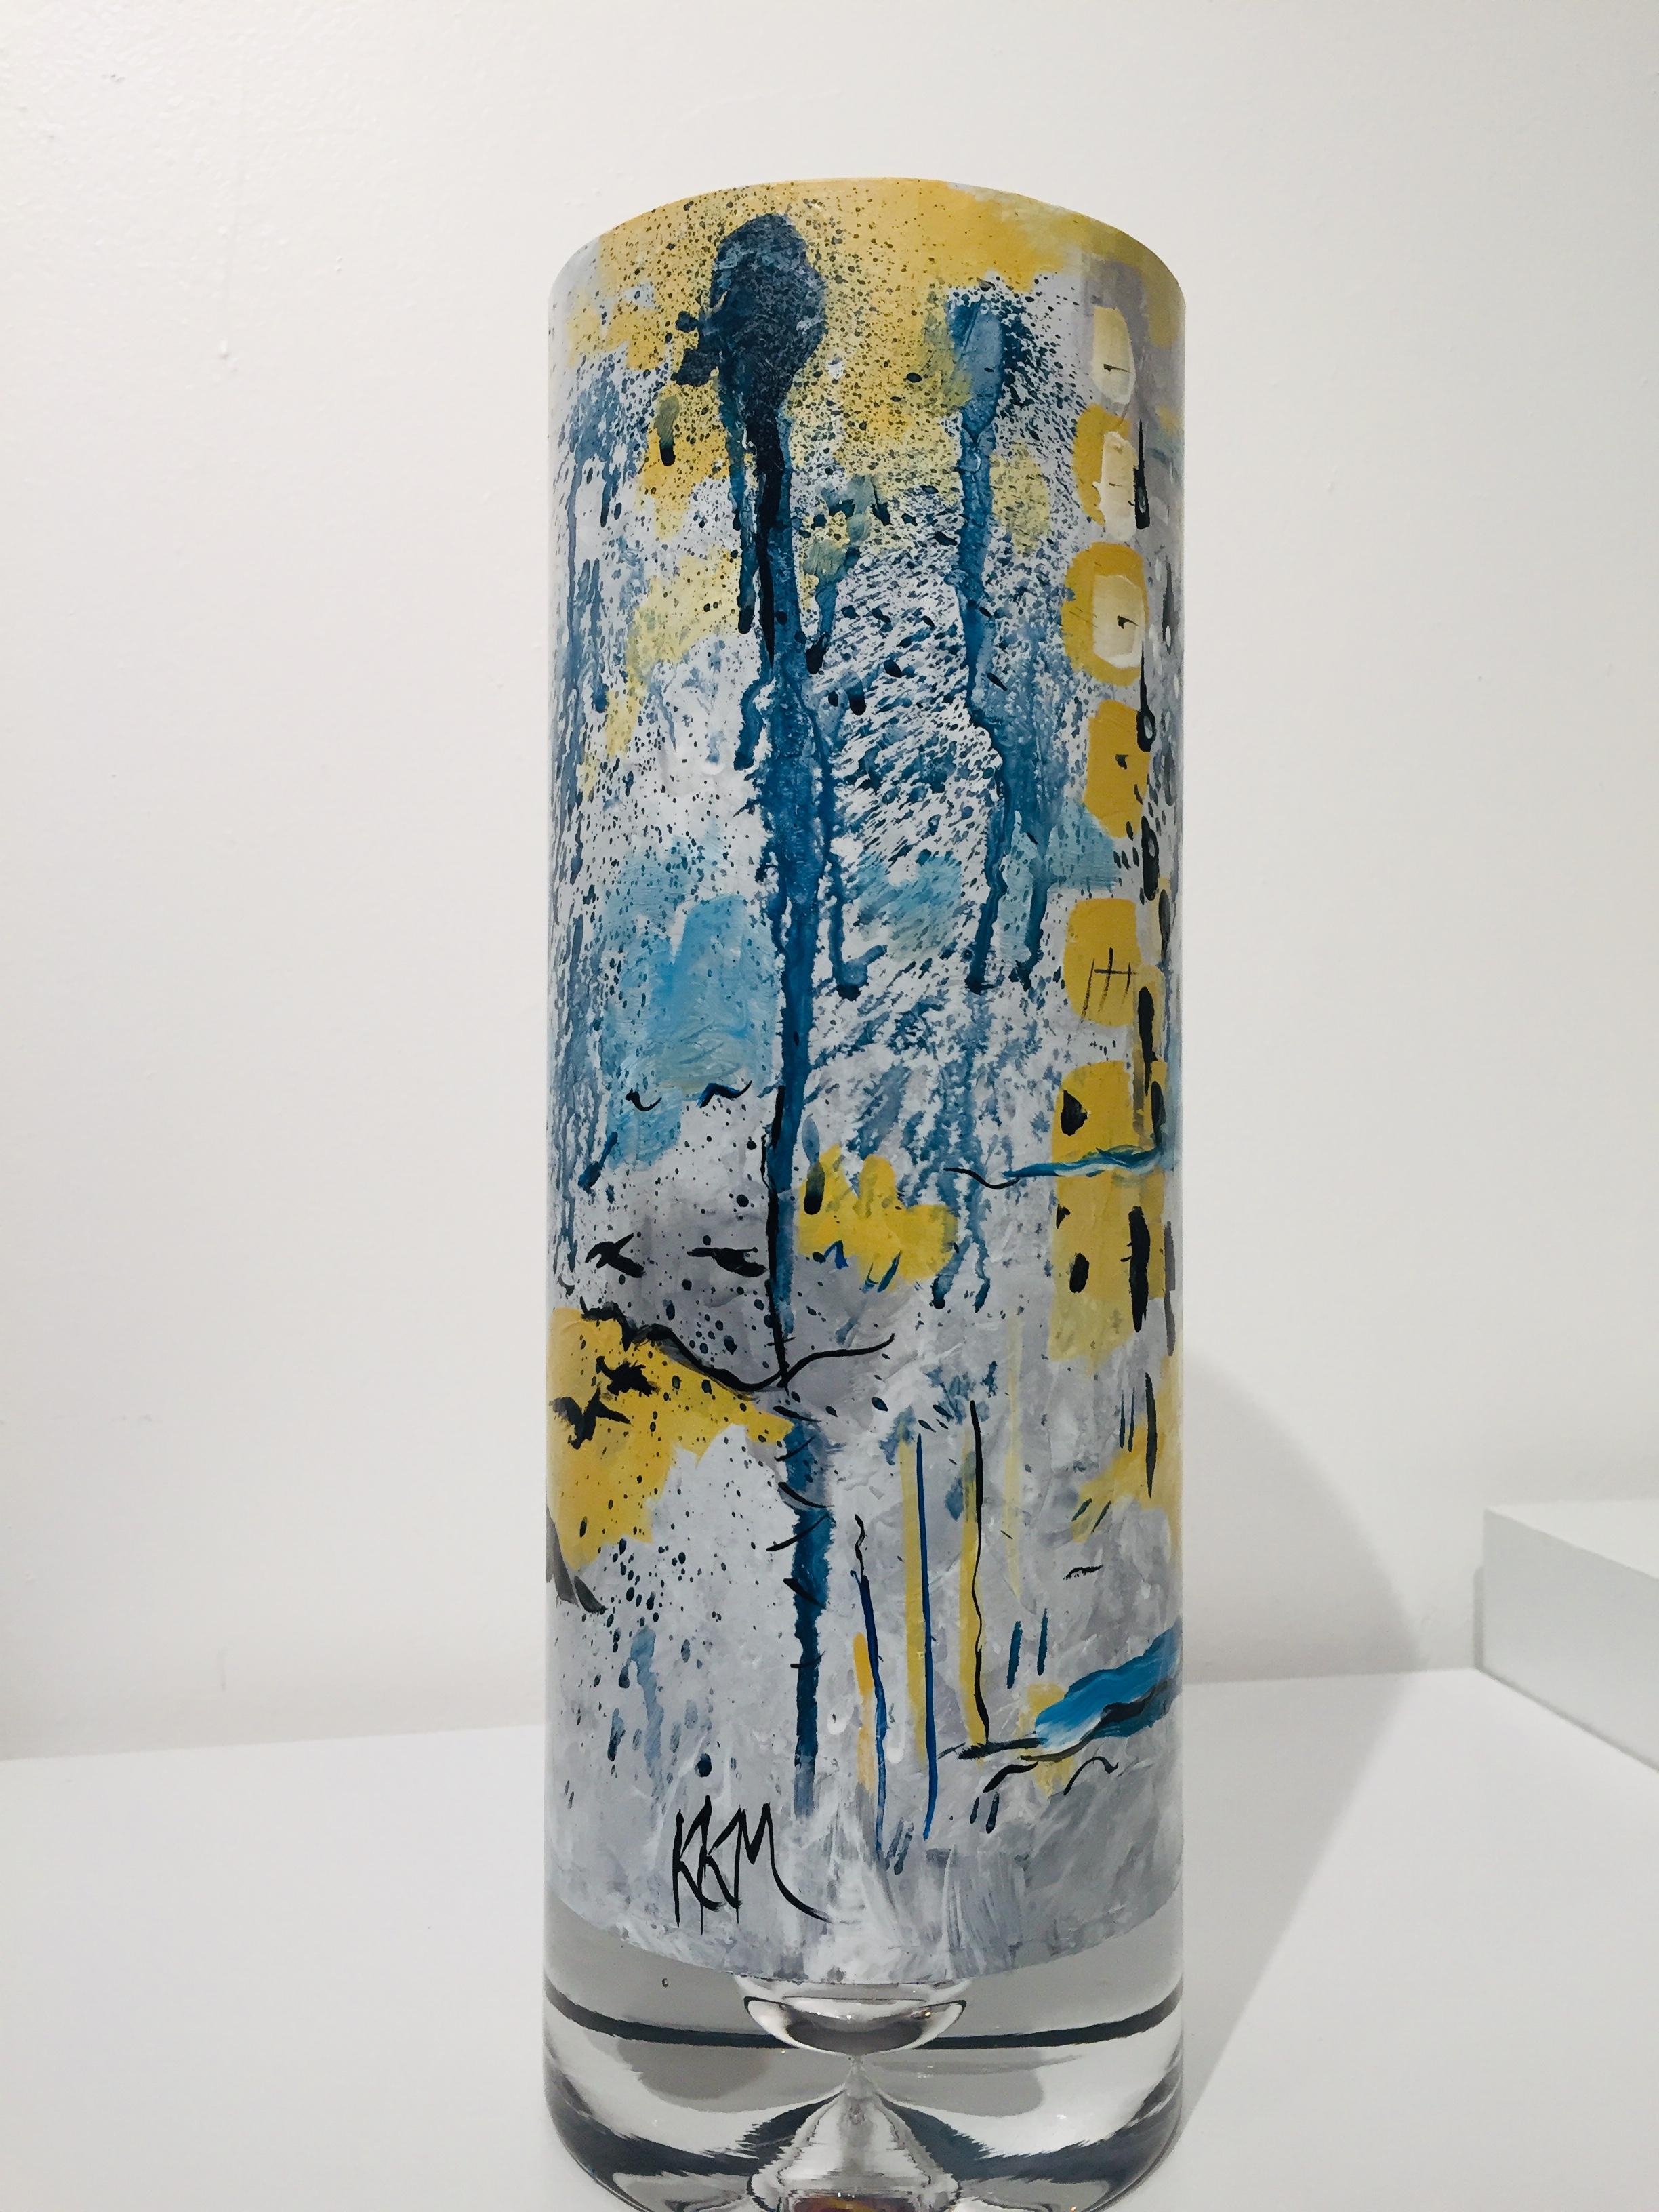 Hand painted one-of-a-kind glass vase by artist Kathleen Kane-Murrell. This vase is perfectly rendered in muted acrylic paint and arrive with a note from the artist. First time available to the public.

 Images 2 and 5 show the five vases painted